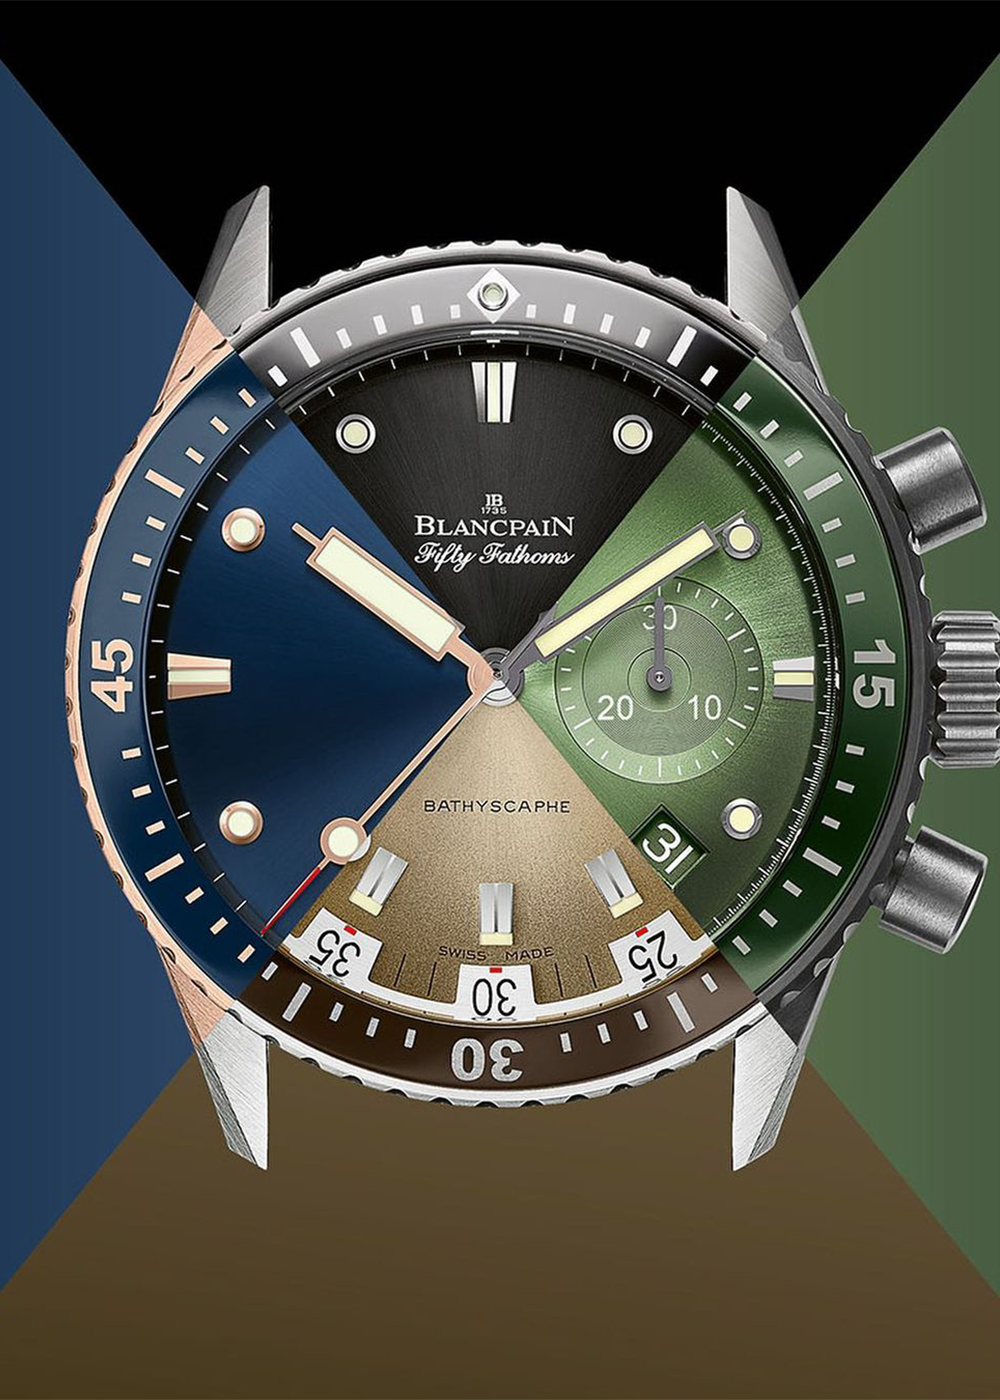 Shop All Blancpain Watches